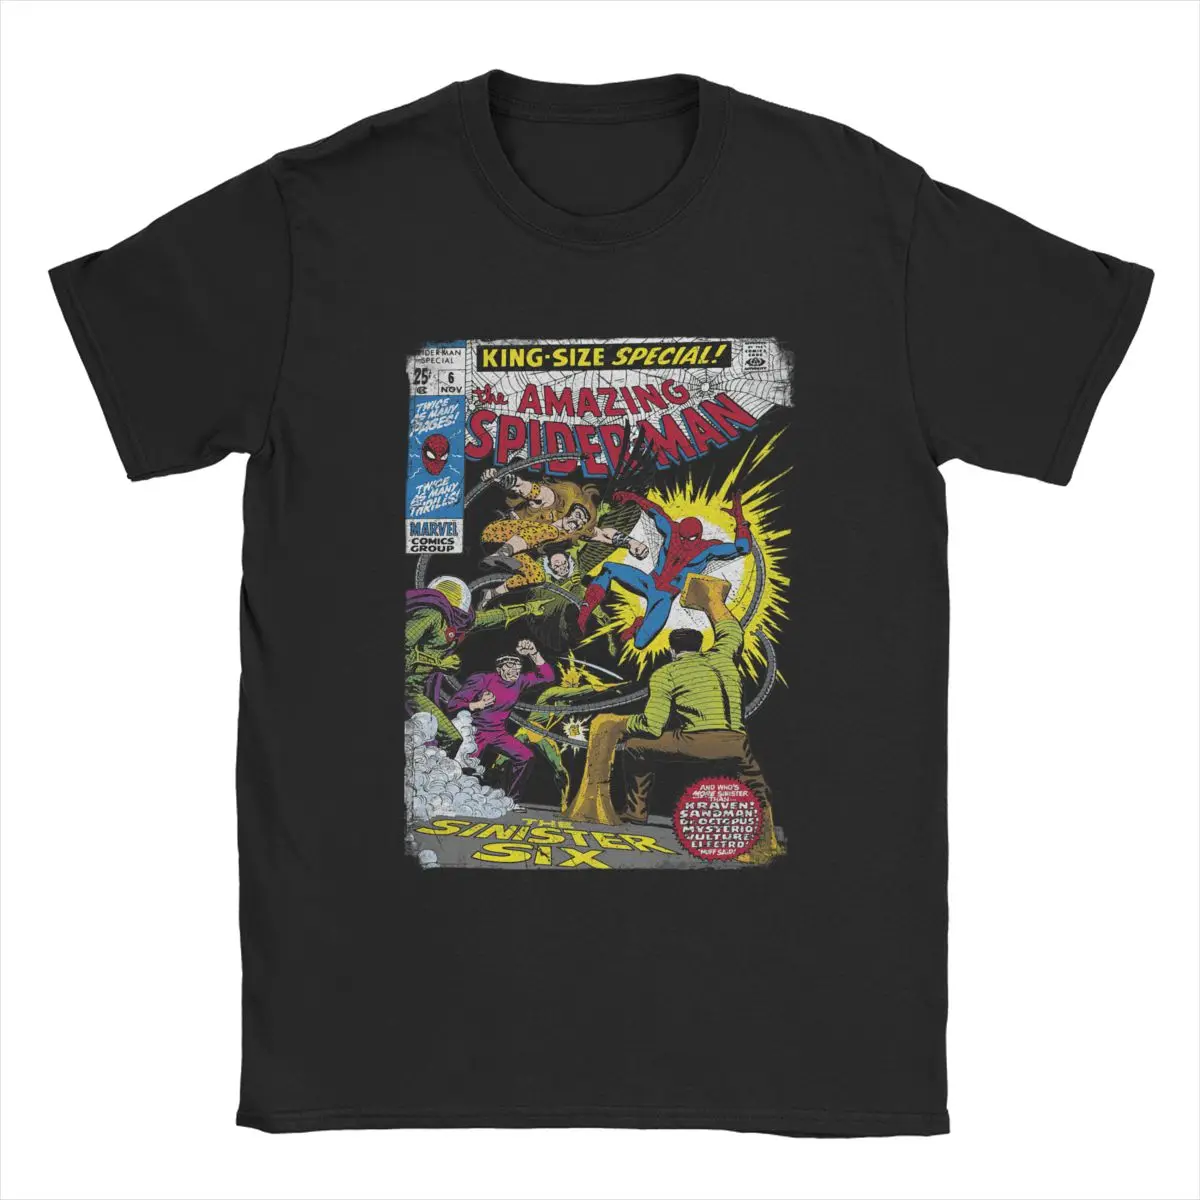 Awesome Sinister Six   Marvel T-Shirt Men Crew Neck Cotton T Shirts Short Sleeve Tees Plus Size Tops